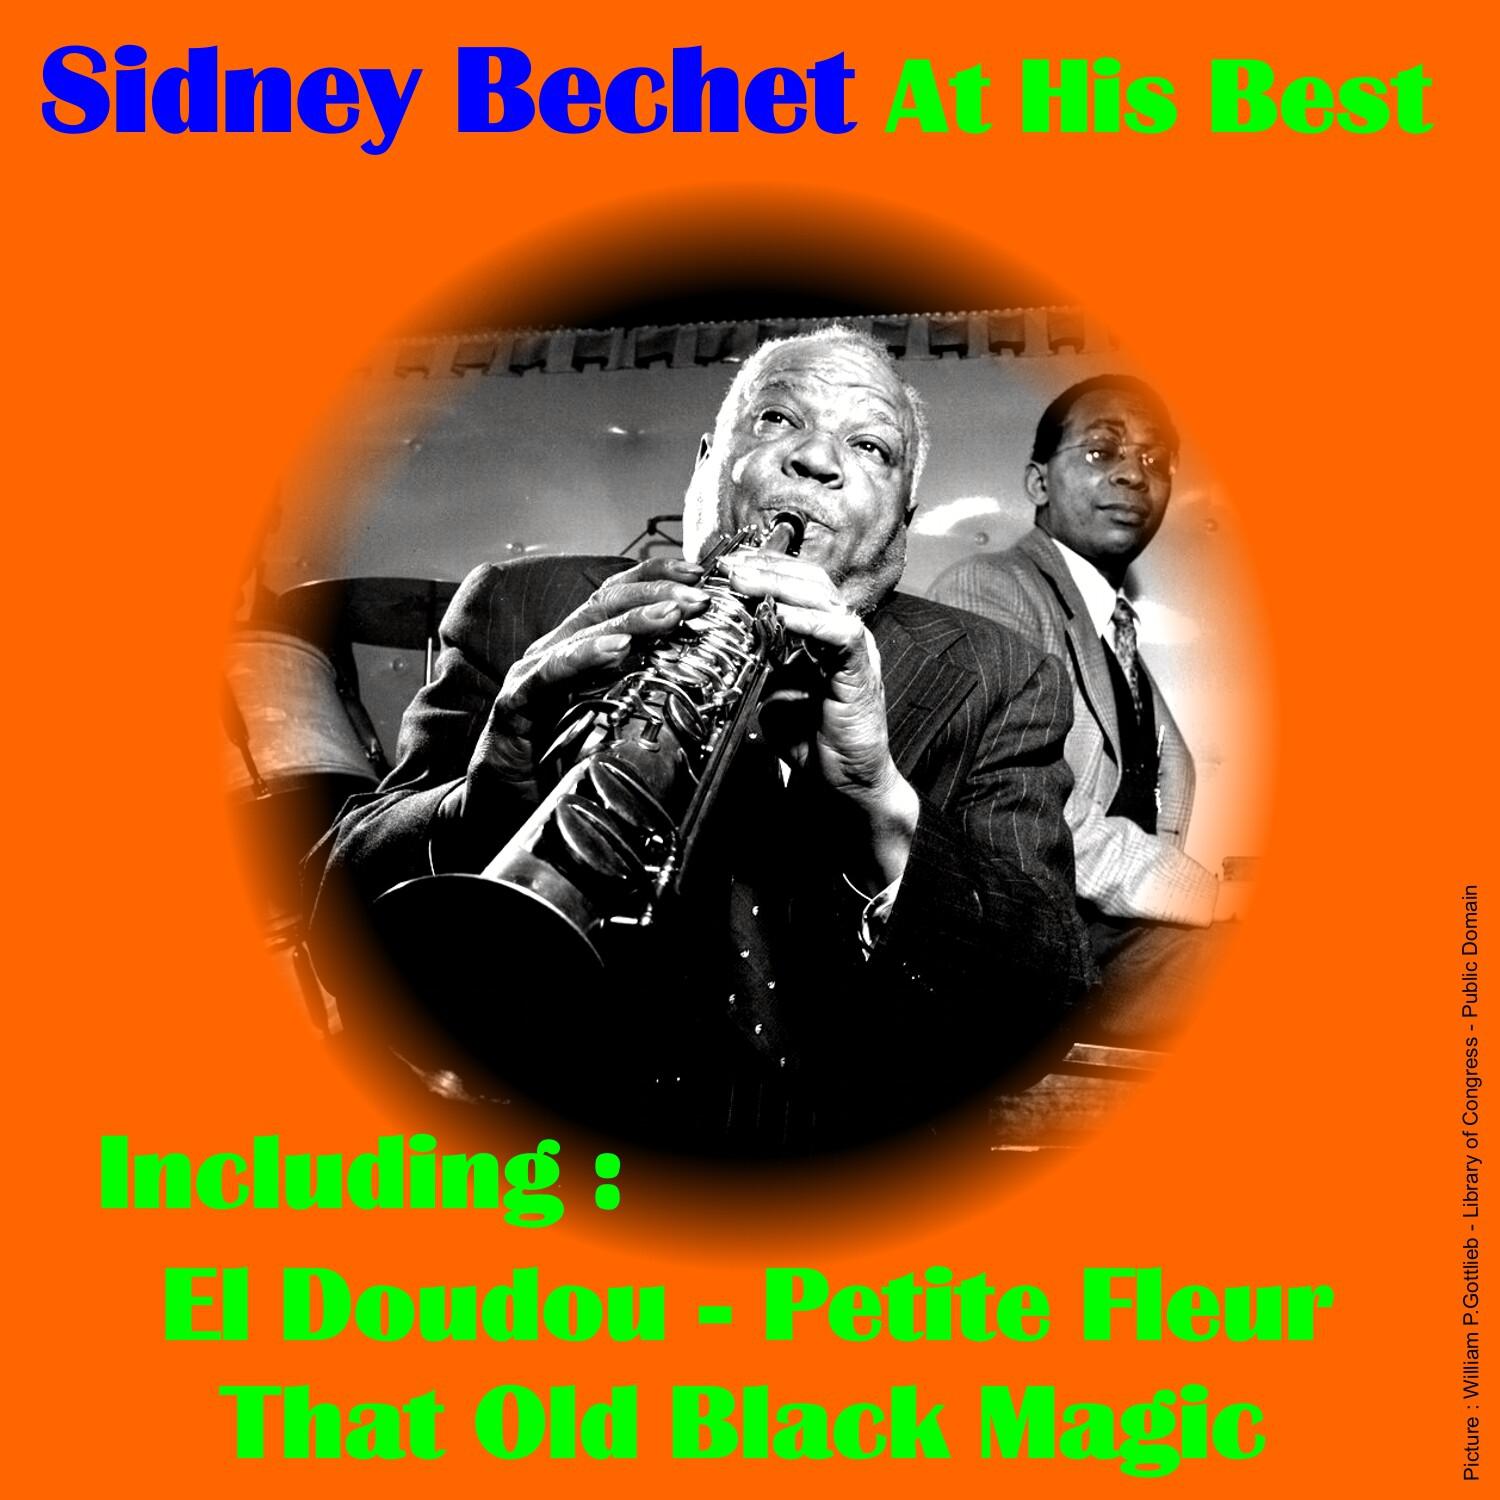 Sidney Bechet at His Best